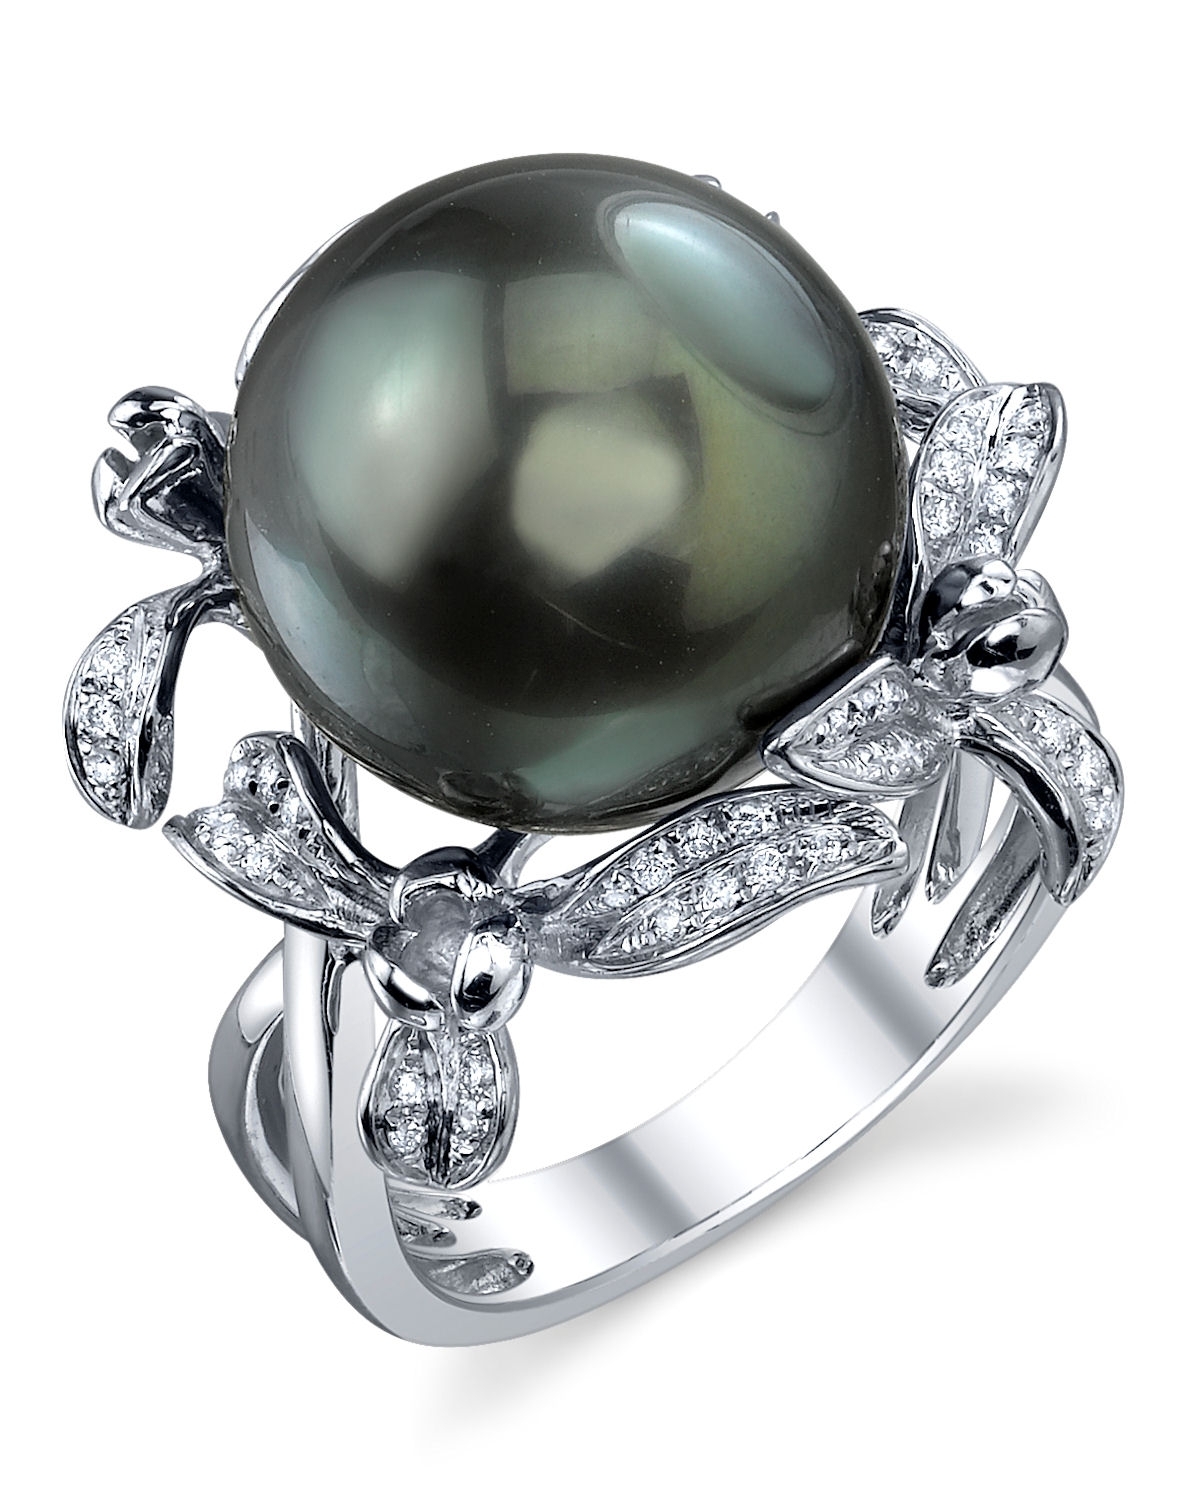 Buy Tahitian South Sea Pearl & Diamond Flower Ring for $ 1,799 - The ...